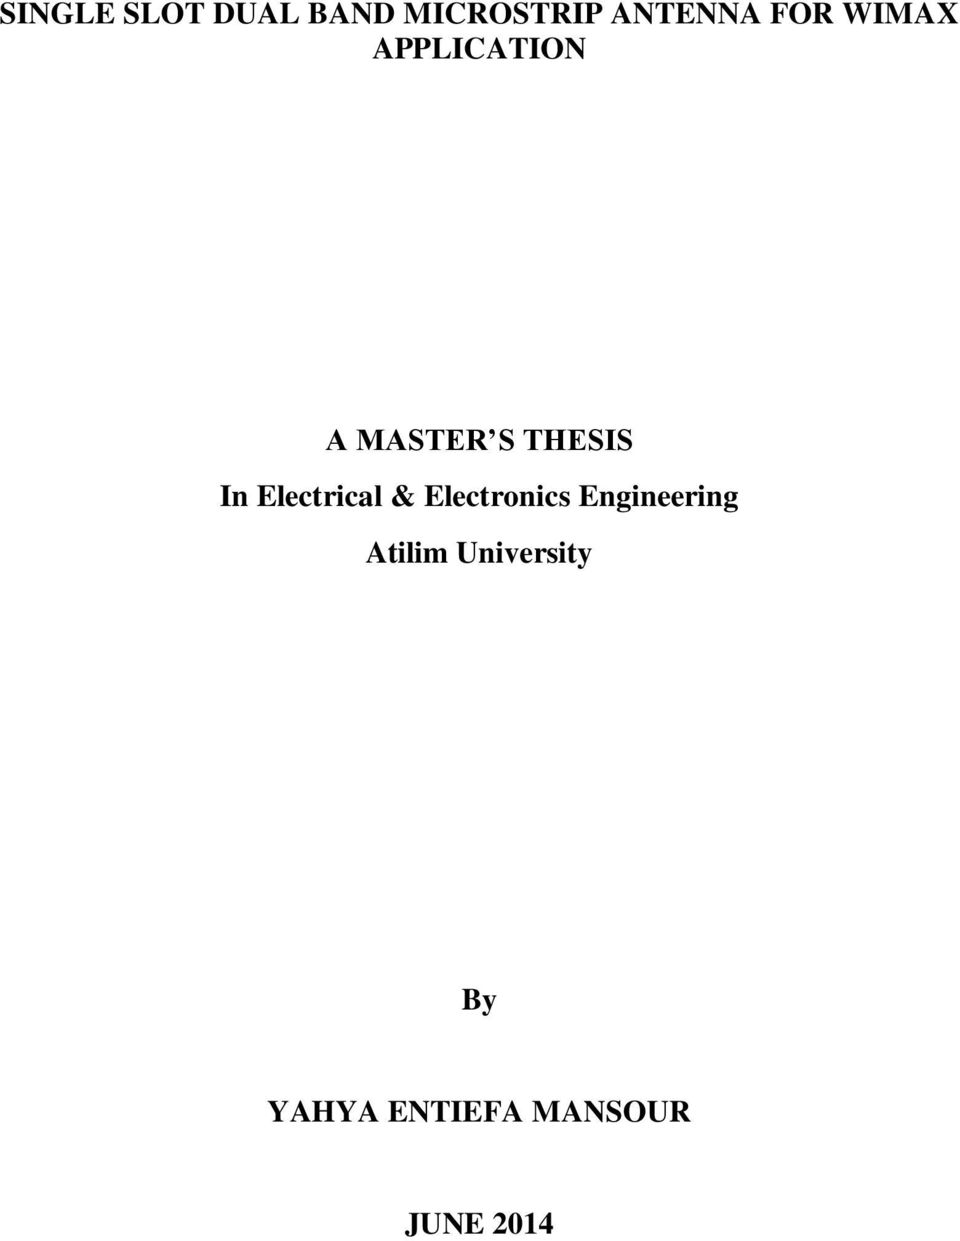 M.Tech - Ph.D Thesis Guidelines in India